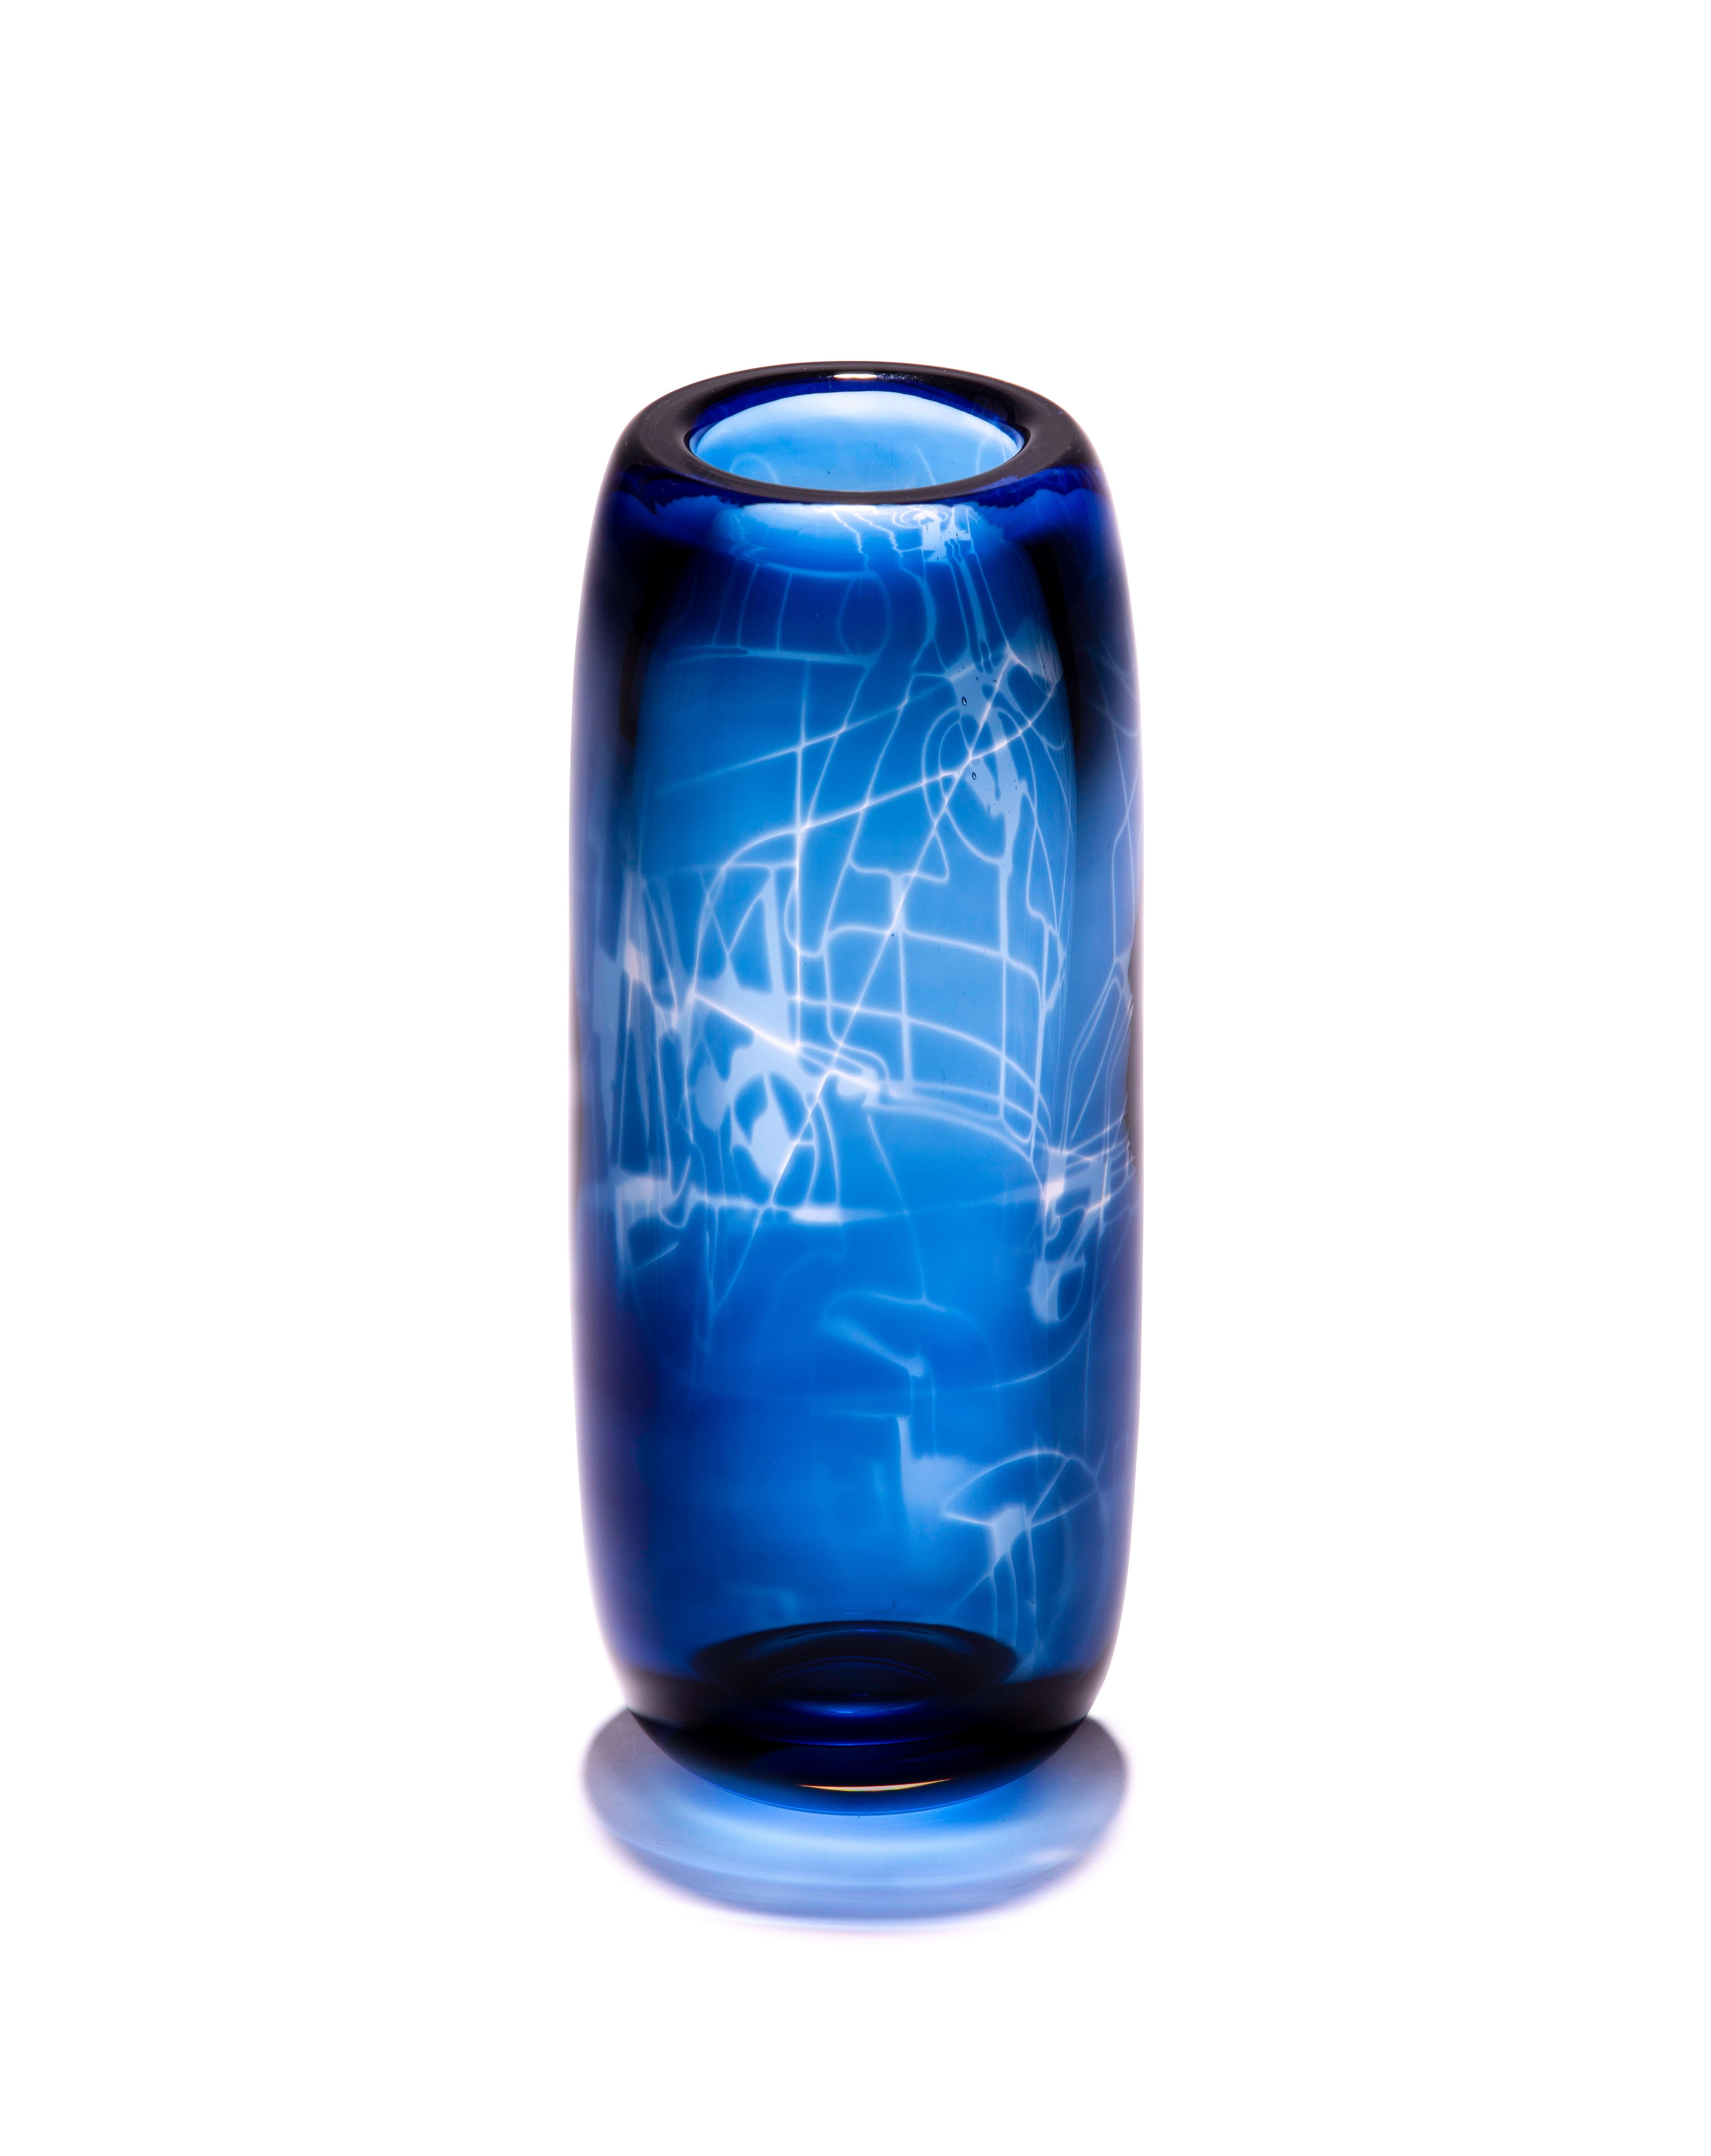 Unique Harvest Graal Blue and Black Glass Vase by Tiina Sarapu 9